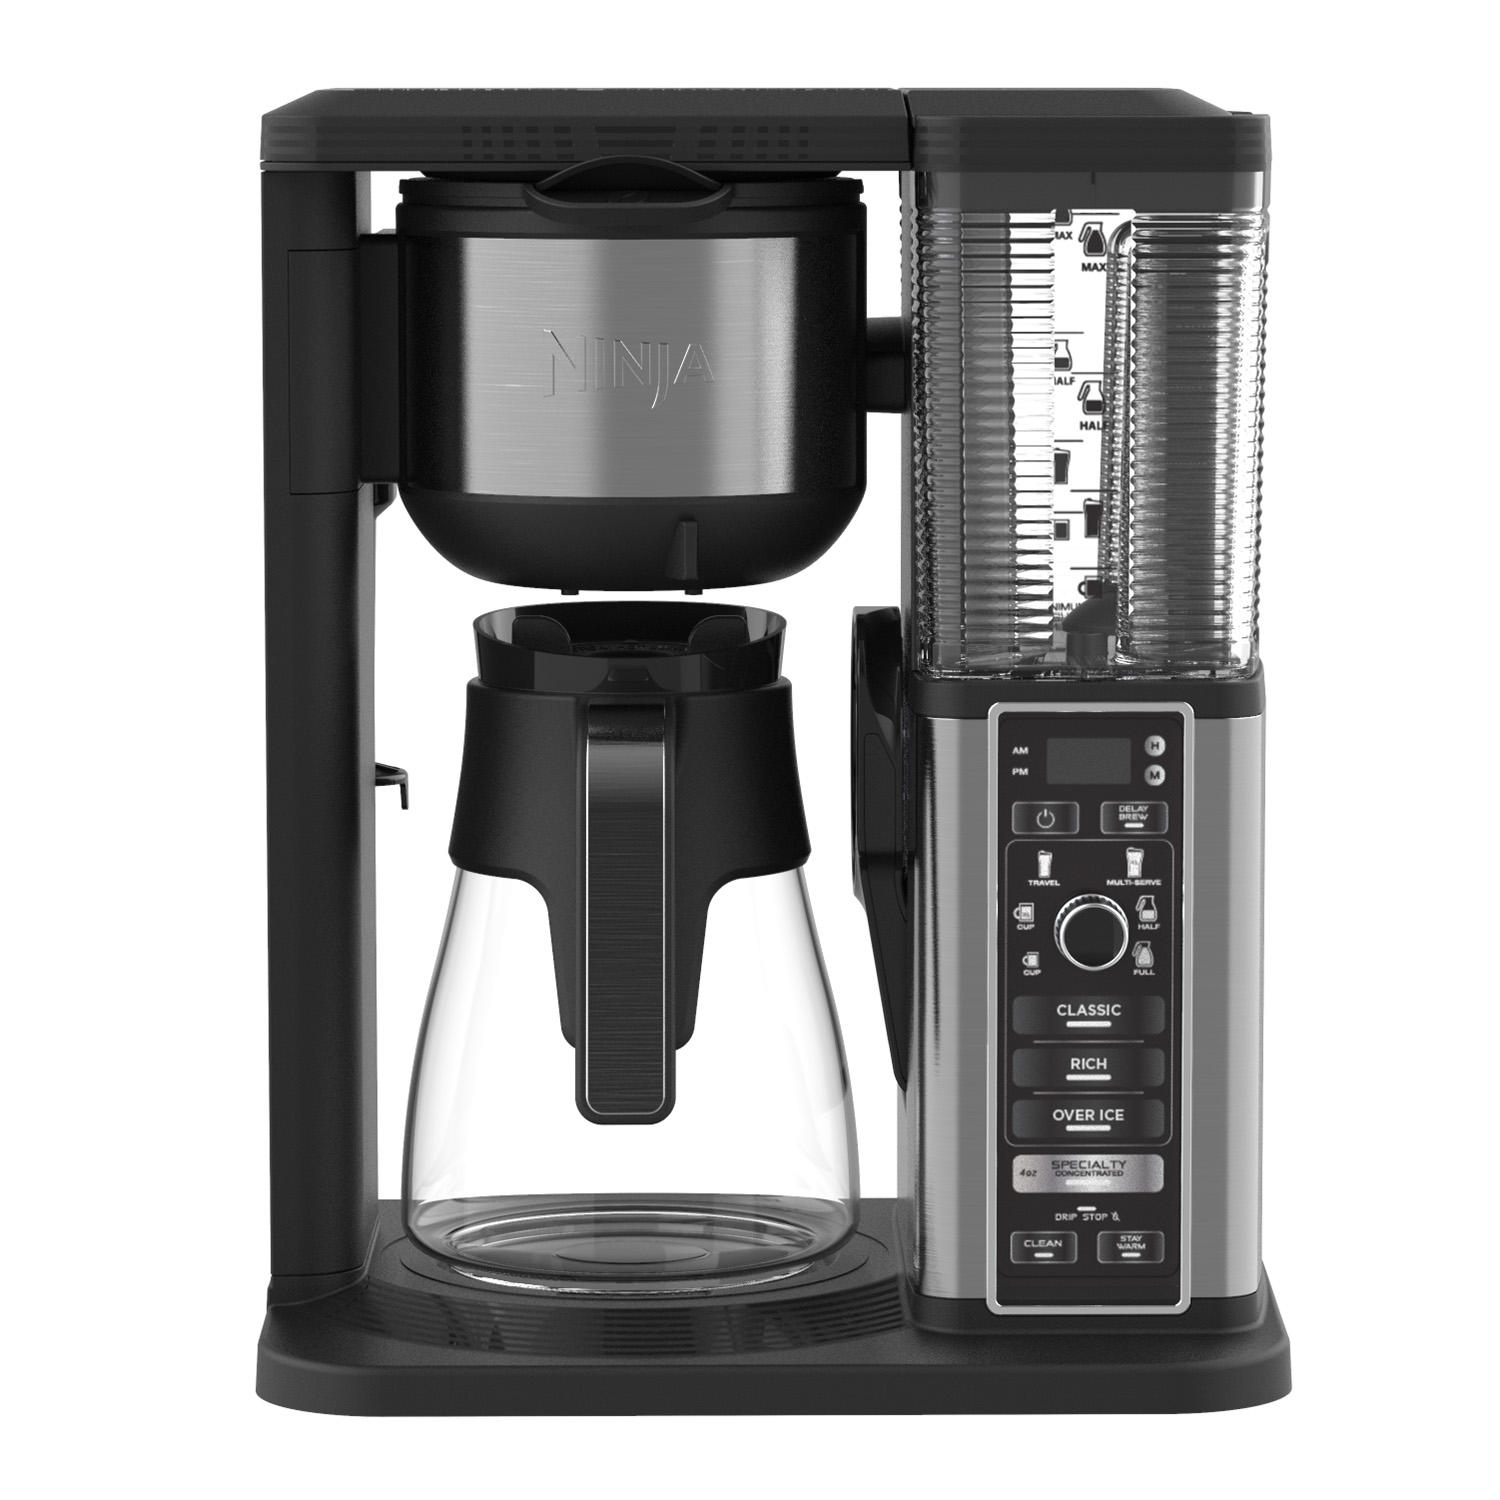 Ninja CM401A Specialty Coffee Maker with Fold-Away Frother and Glass Carafe